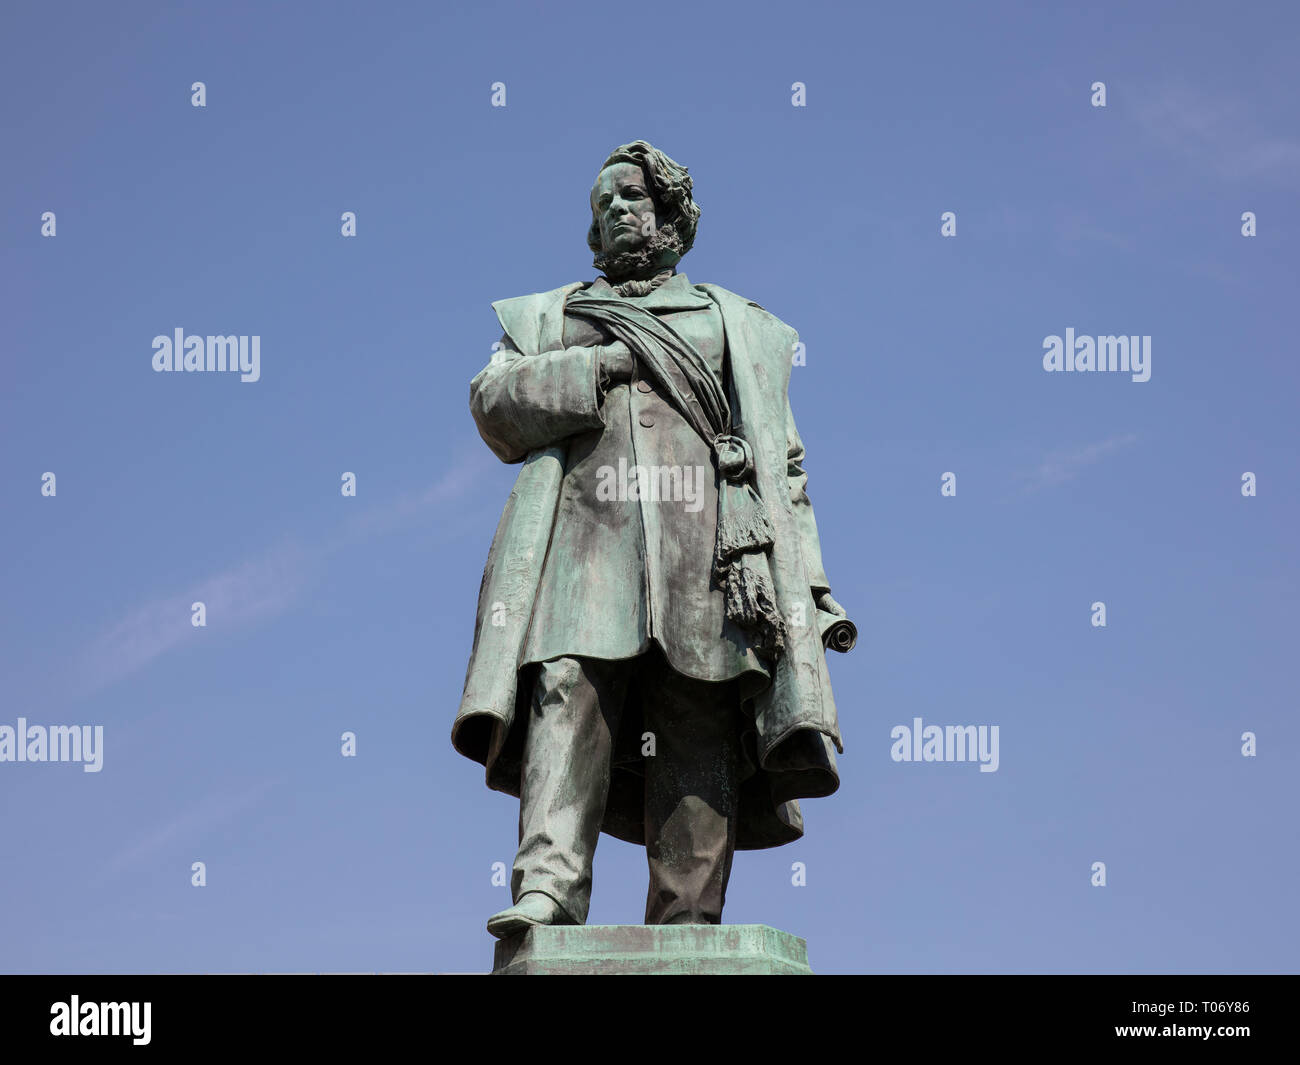 The statue located at the famous center Daniele Manin (1804-1857), revolutionary, imprisoned by the Austrians in 1848. Stock Photo